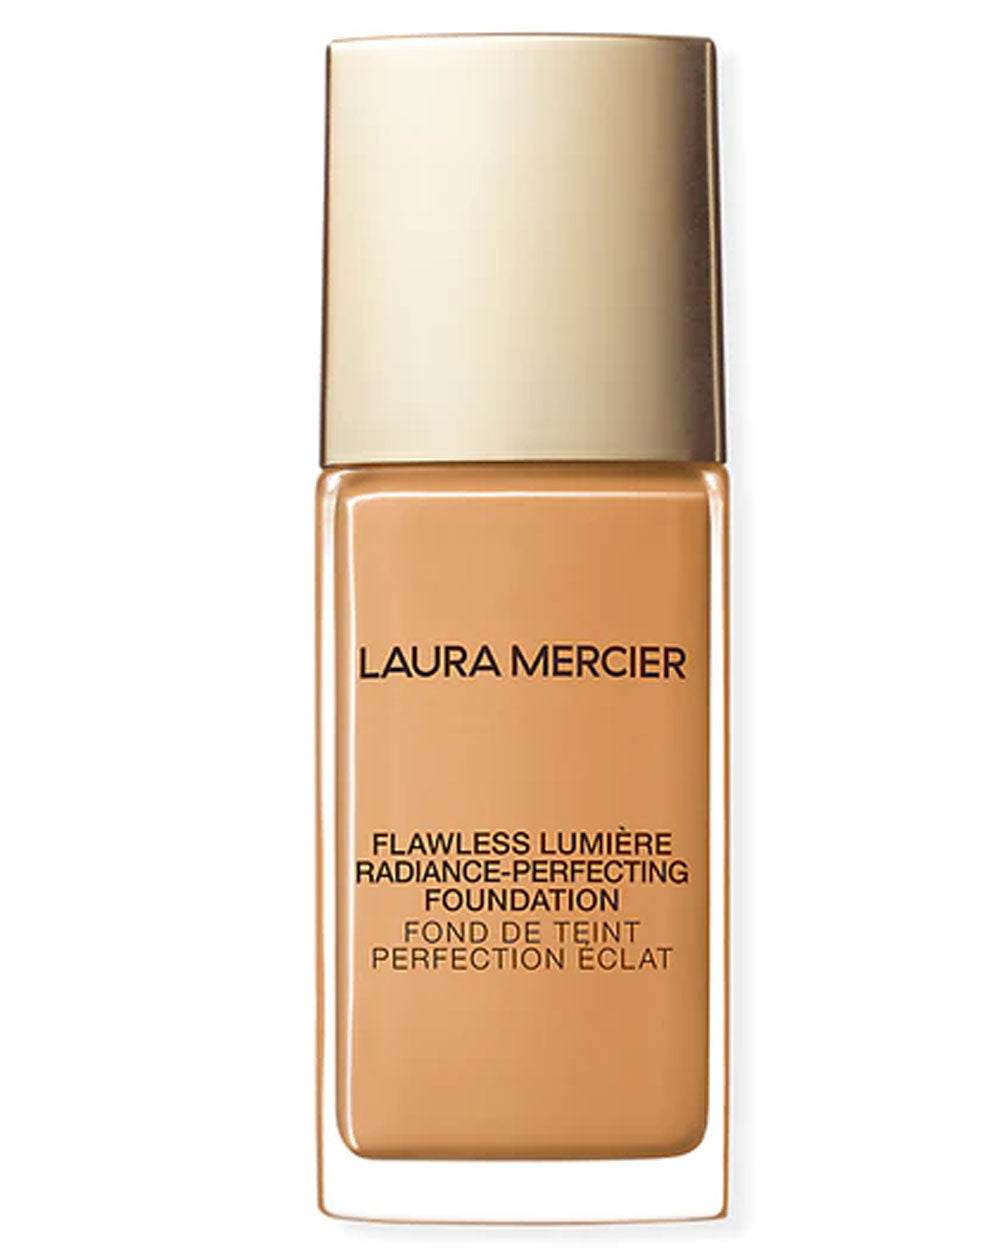 Flawless Lumiere Foundation in 4W2 Chai